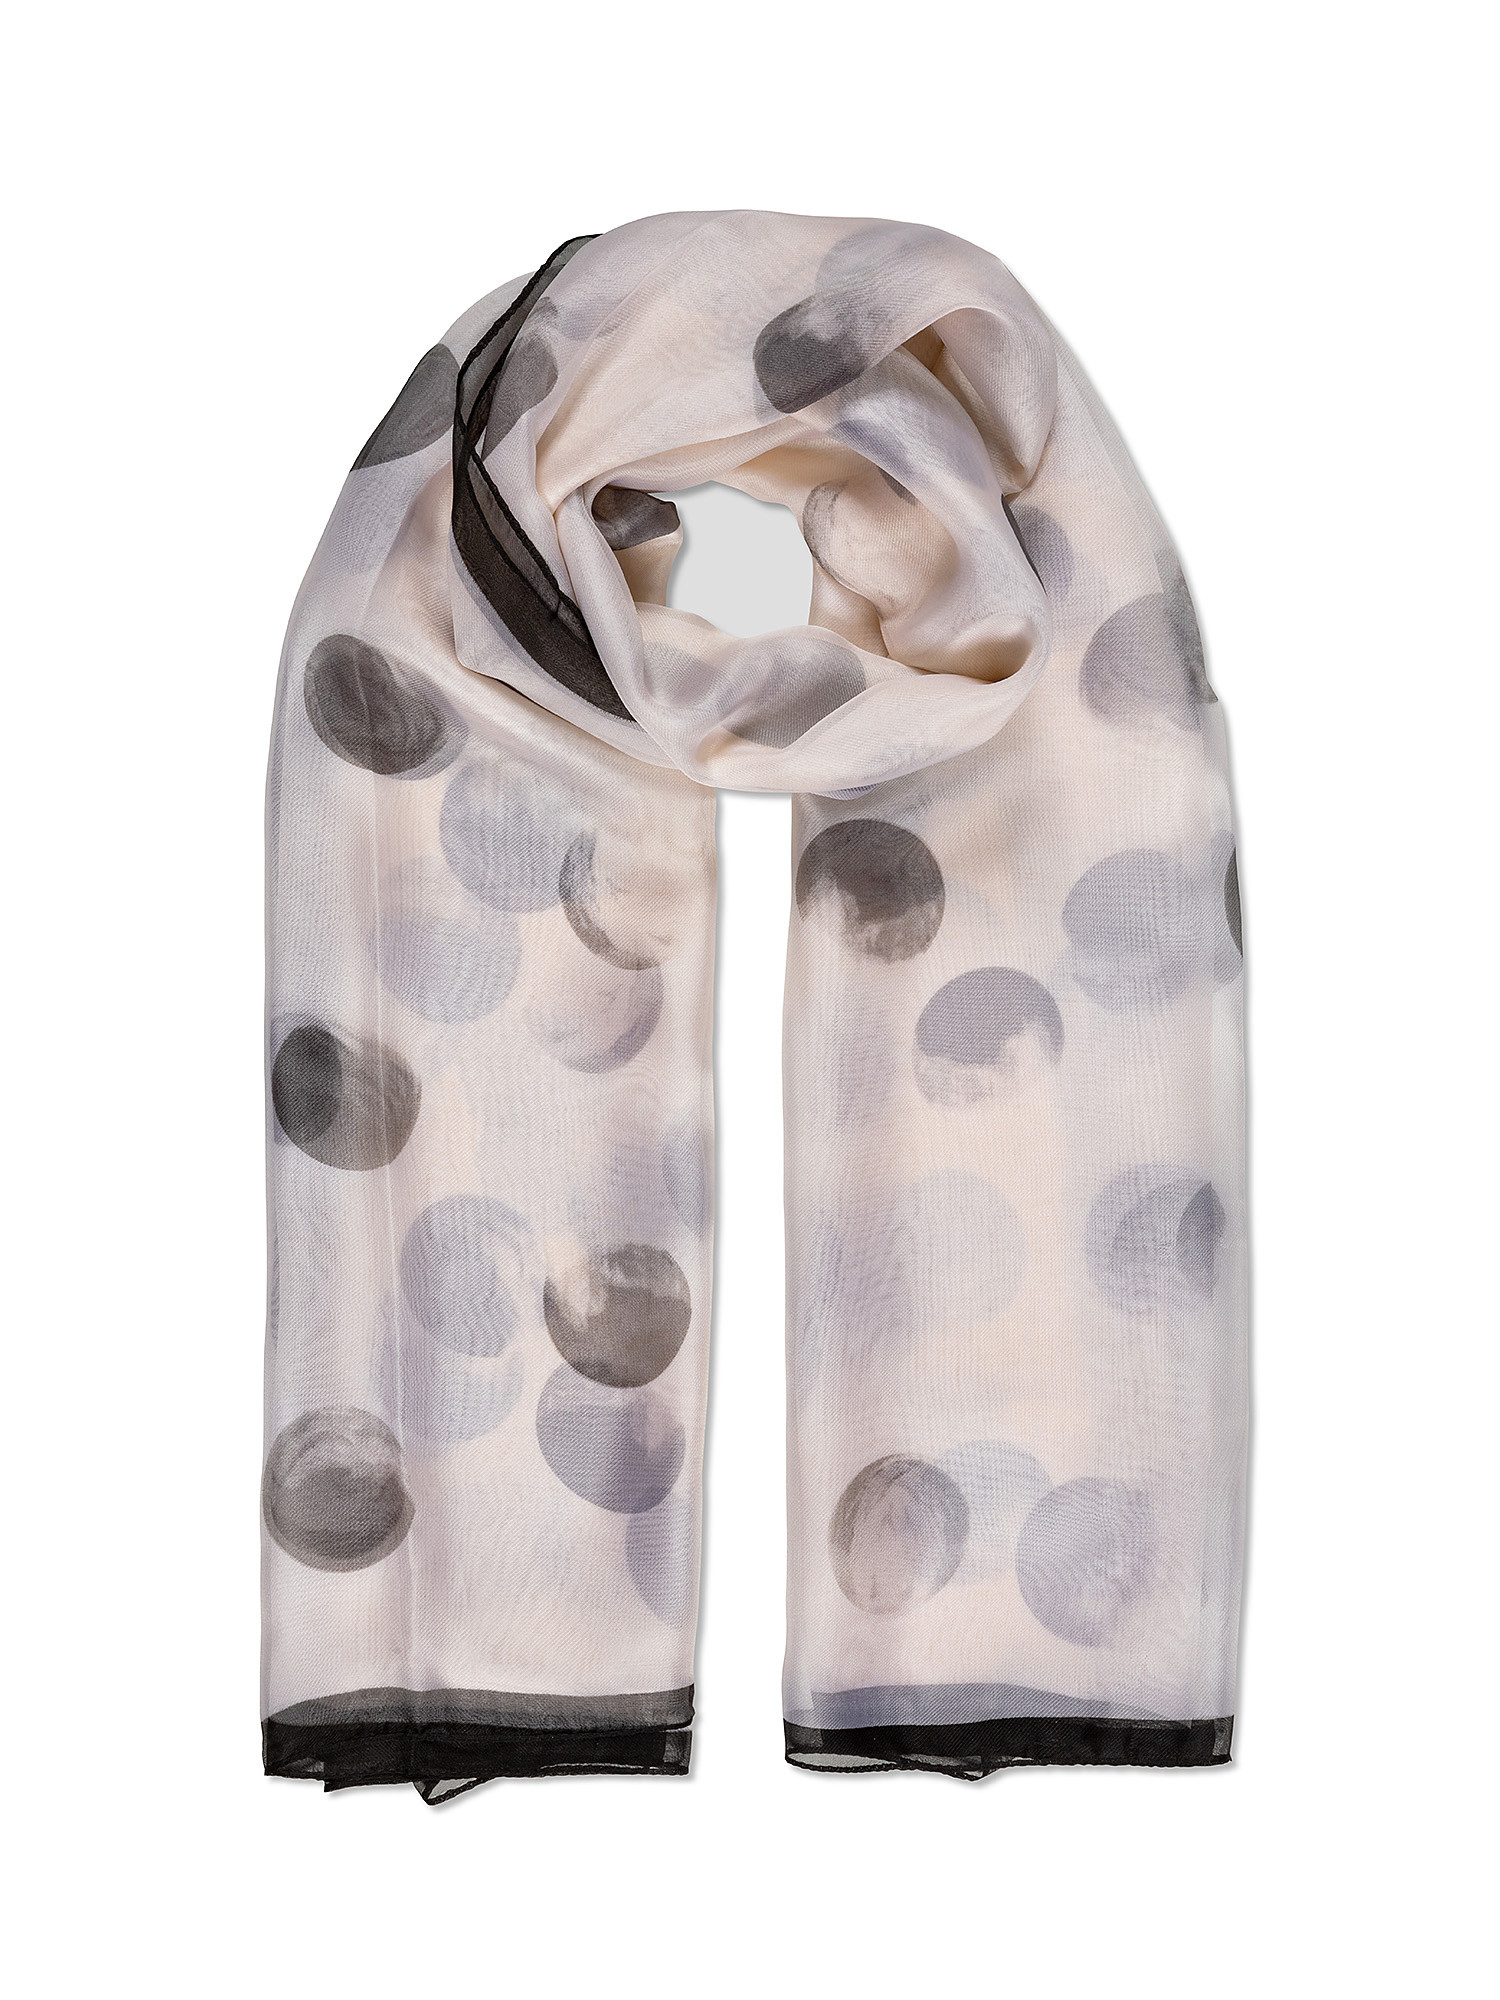 Koan - Scarf with bubble print, Ivory, large image number 0